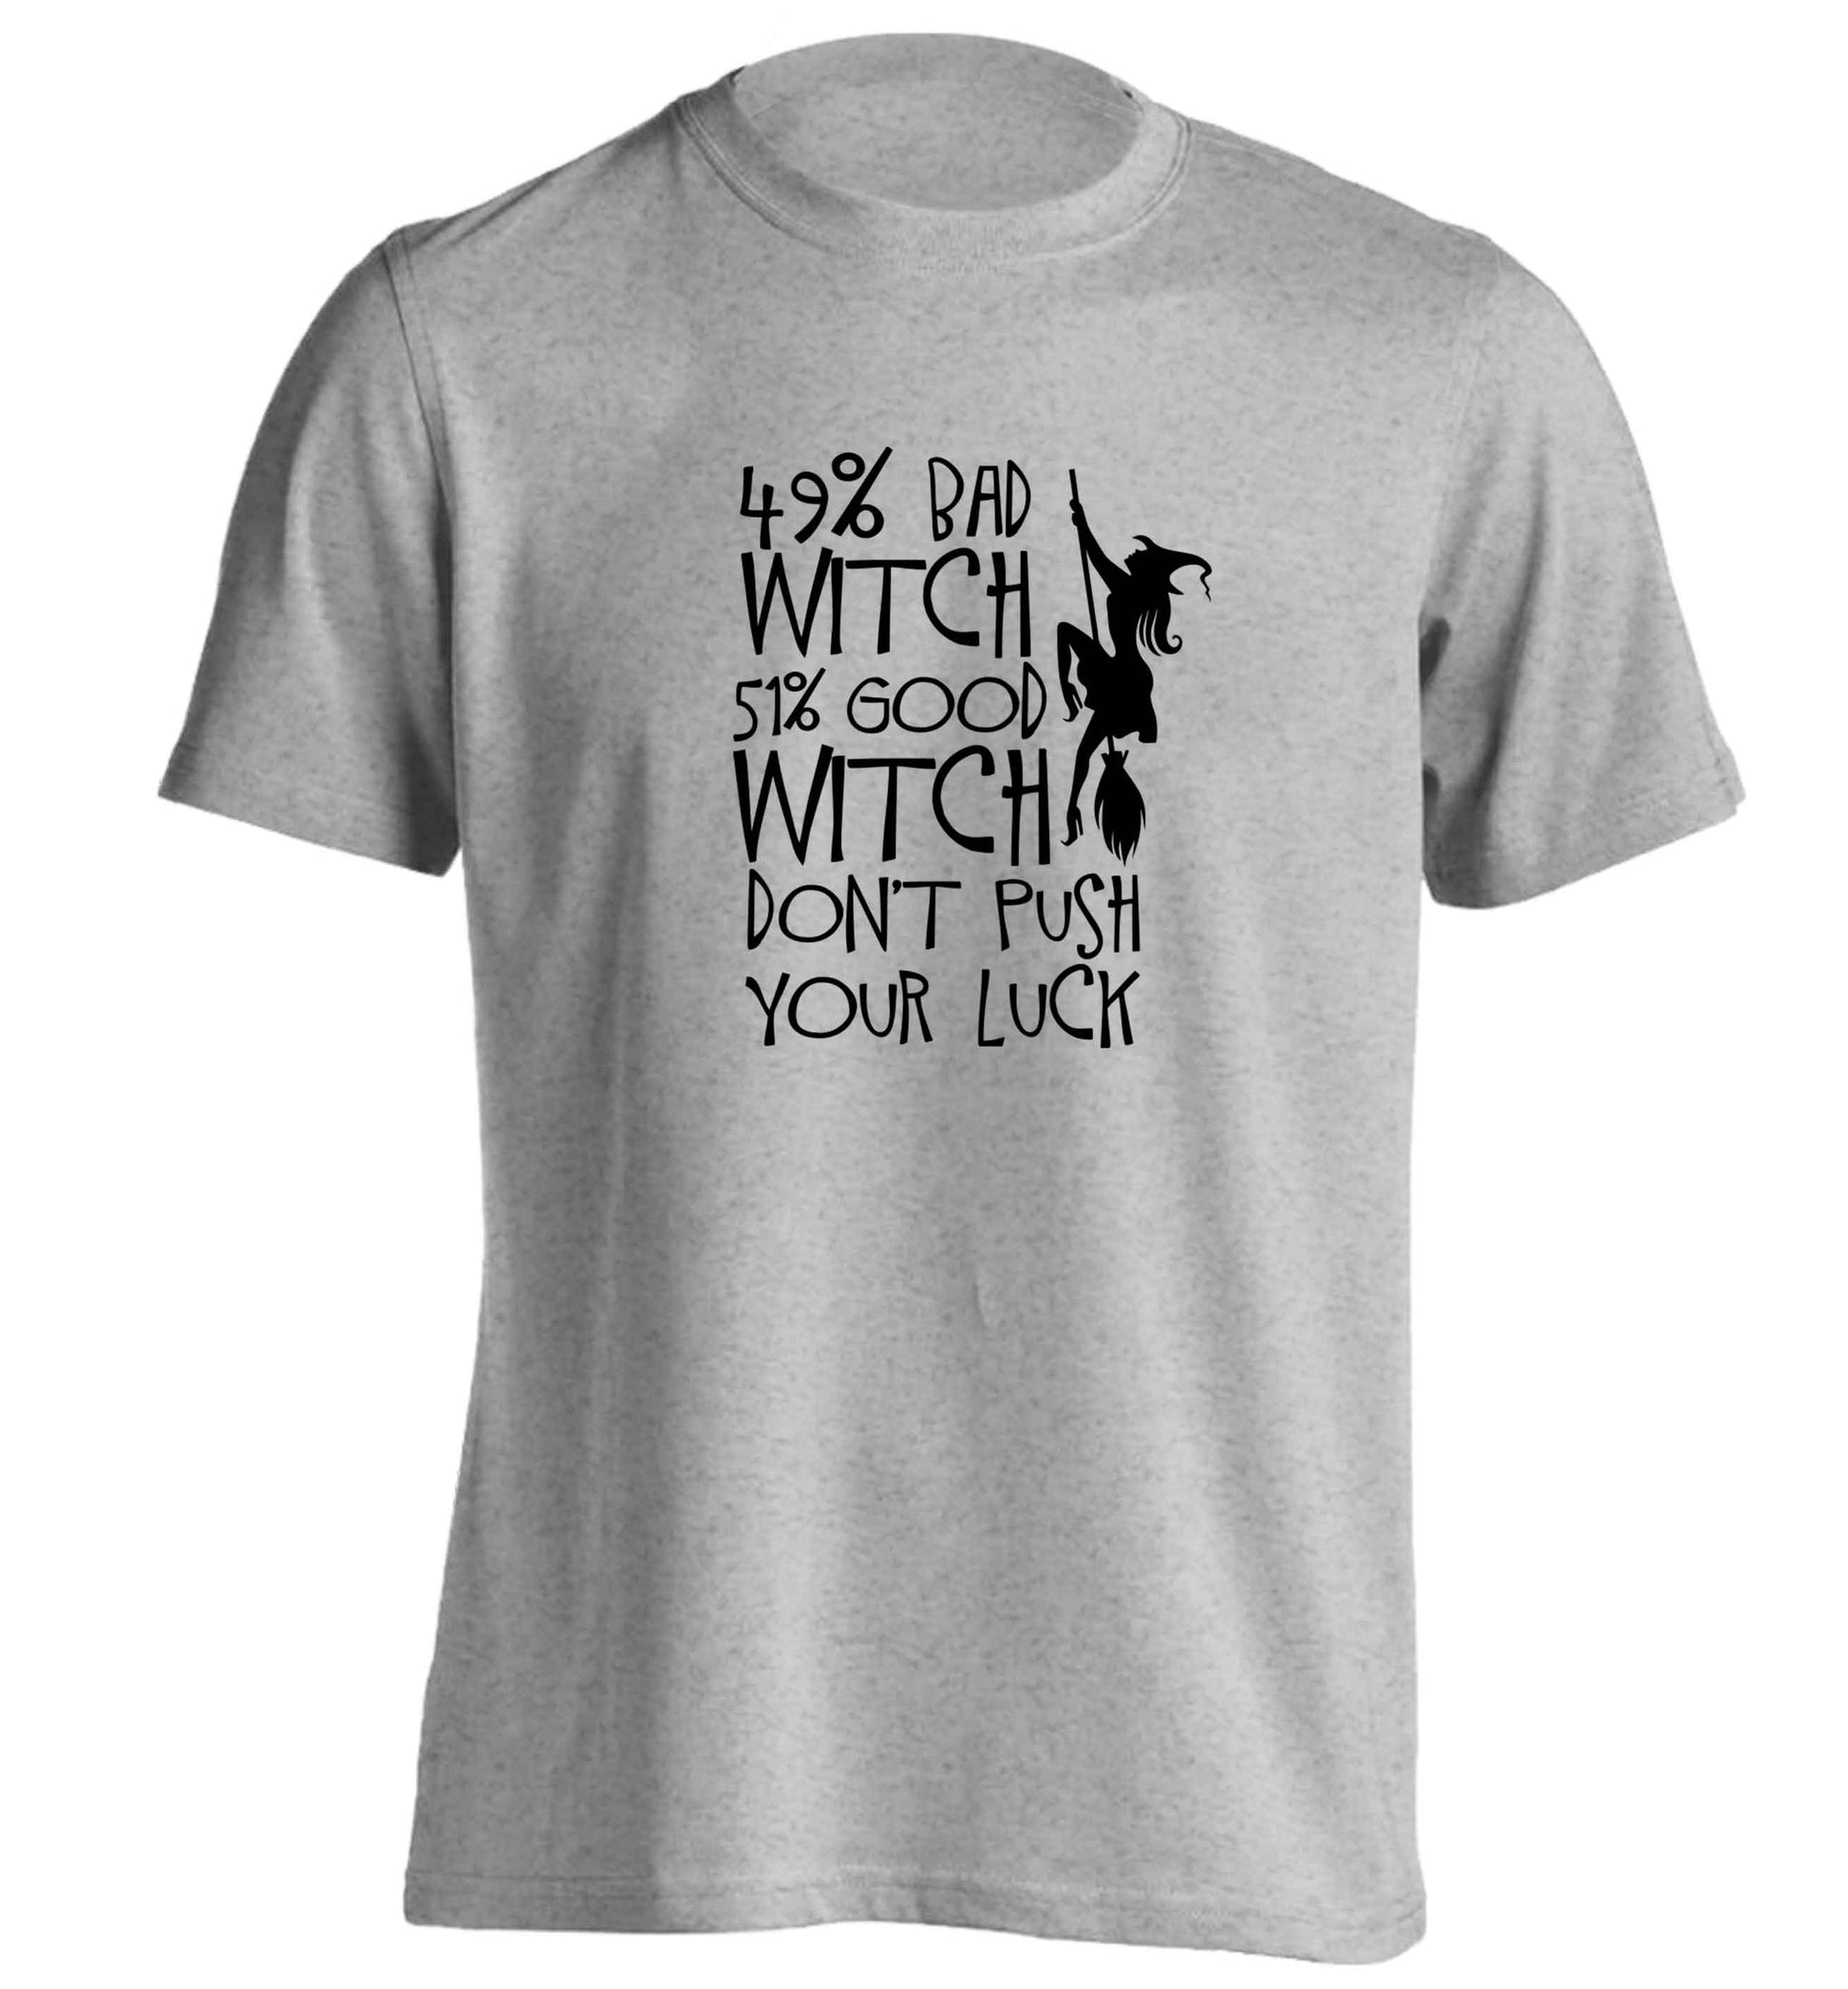 49% bad witch 51% good witch don't push your luck adults unisex grey Tshirt 2XL